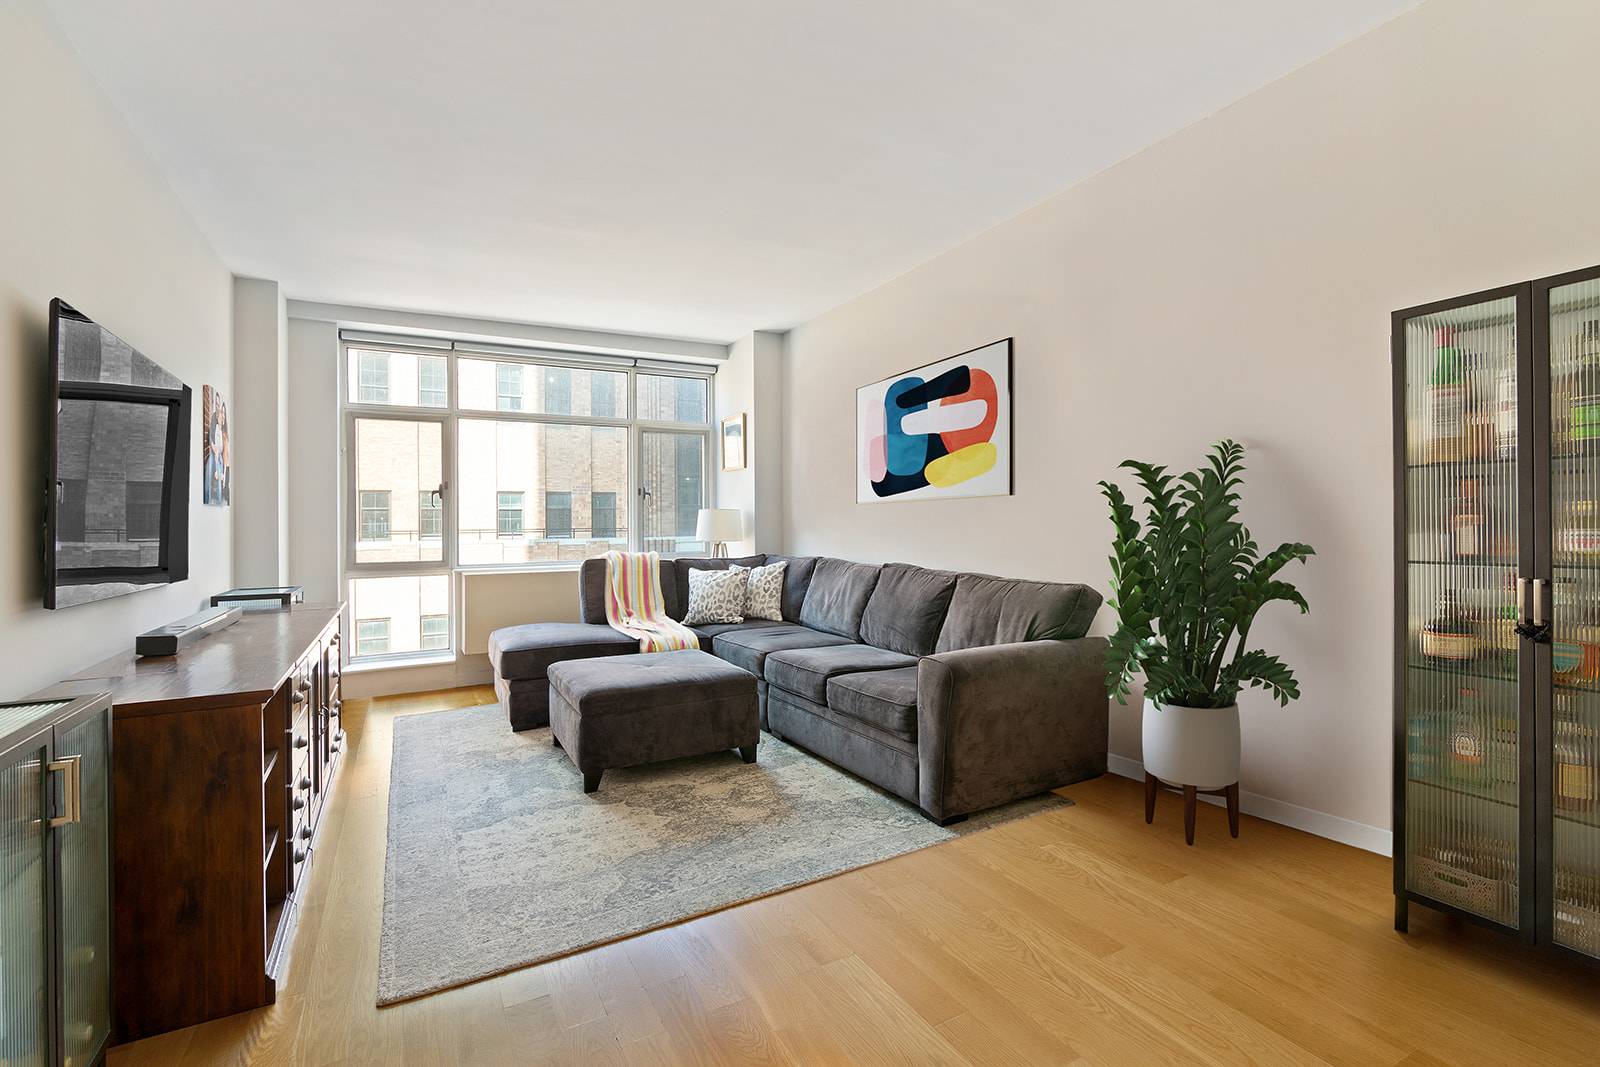 Beautiful 2 bedroom 2 bath condo home in a centrally located full service building straddling Boerum Hill and Downtown Brooklyn.